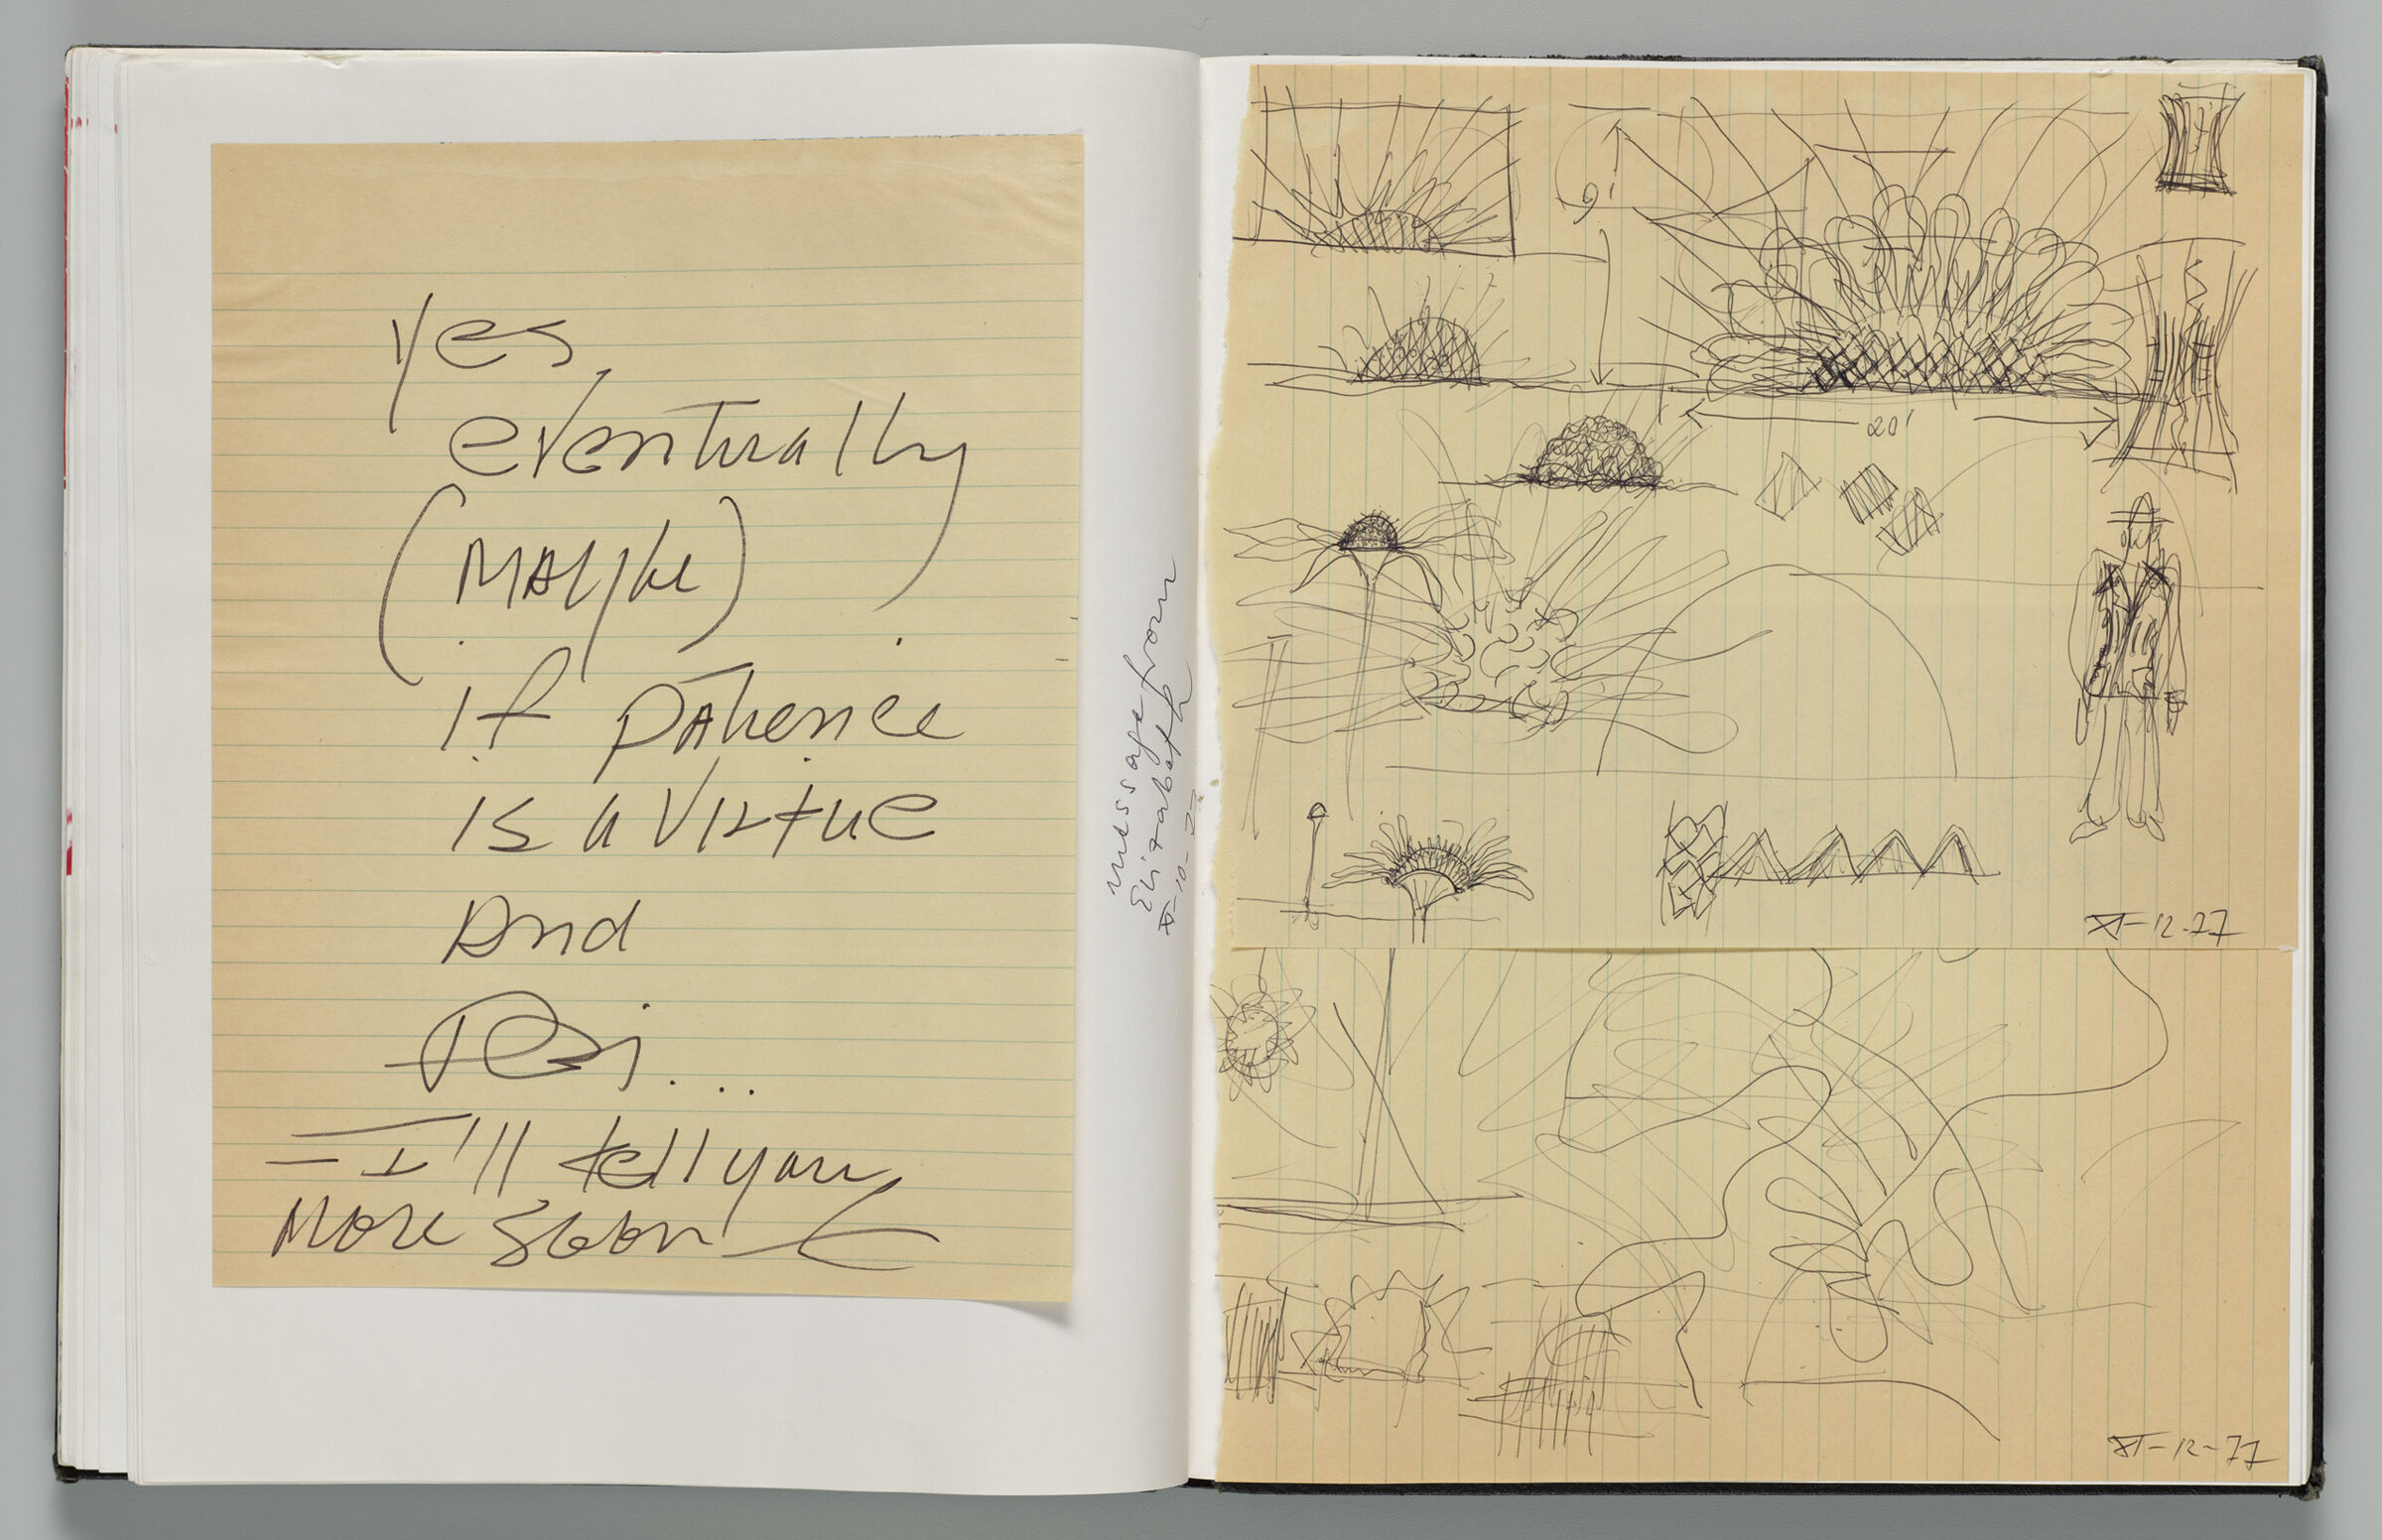 Untitled (Pasted Notes On Legal Ruled Paper, Left Page); Untitled (Pasted Sketches On Legal Ruled Paper, Right Page)